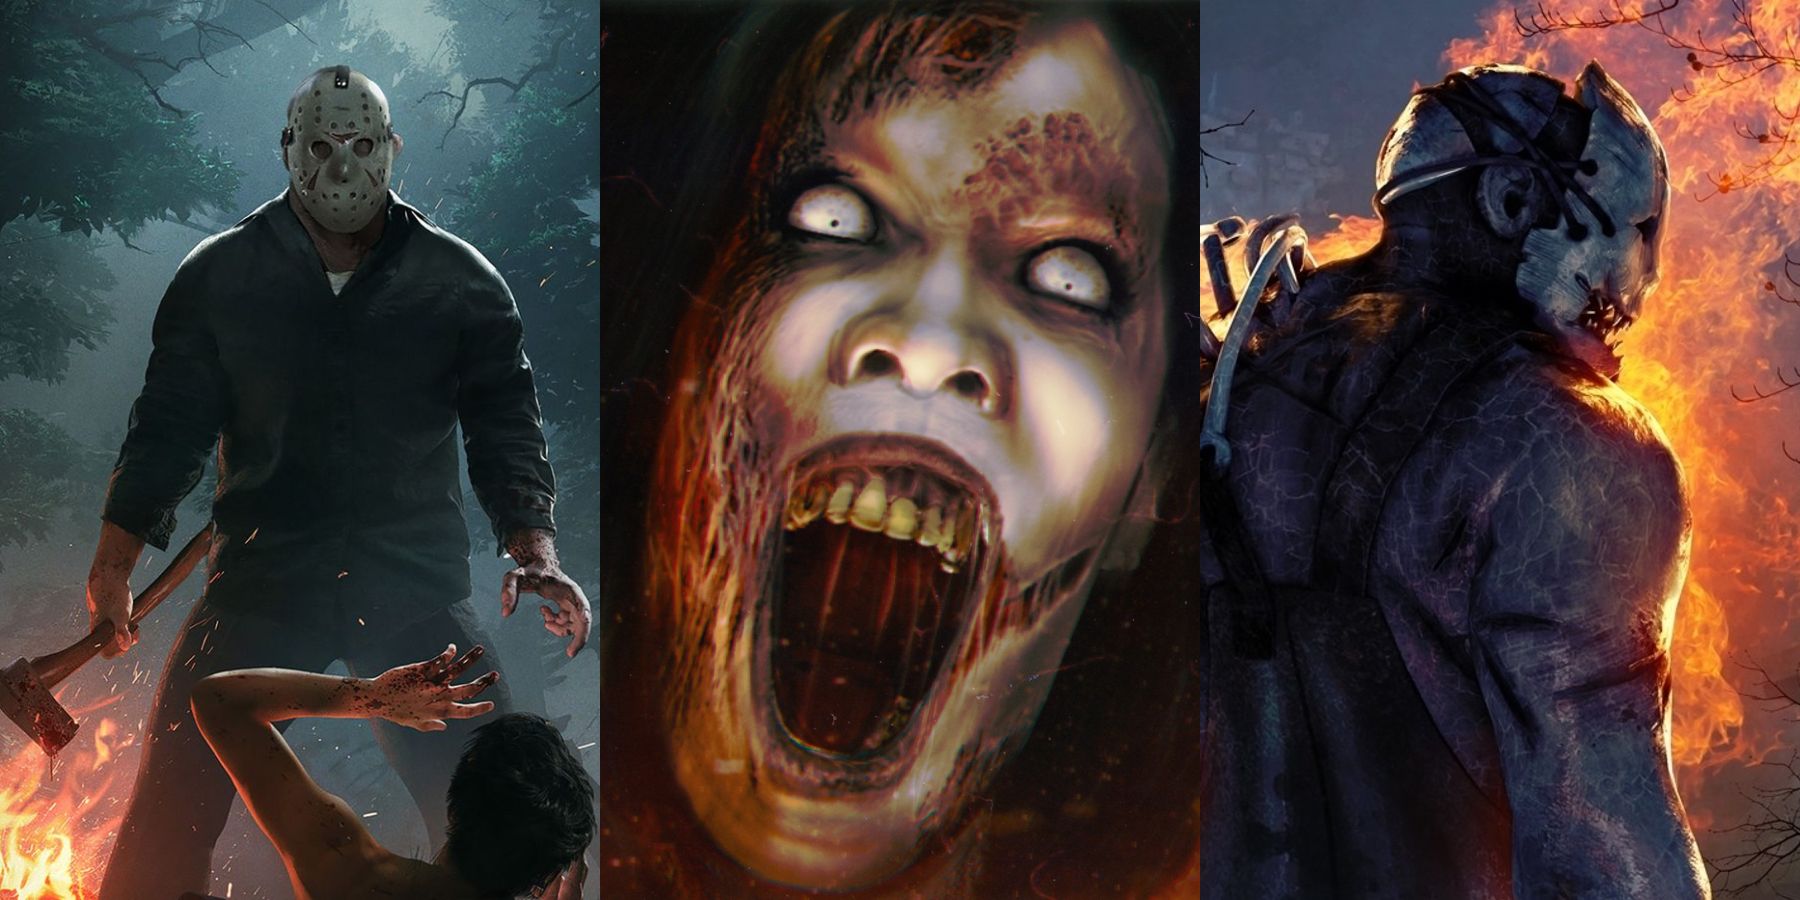 Multiplayer horror games are saturating the genre.